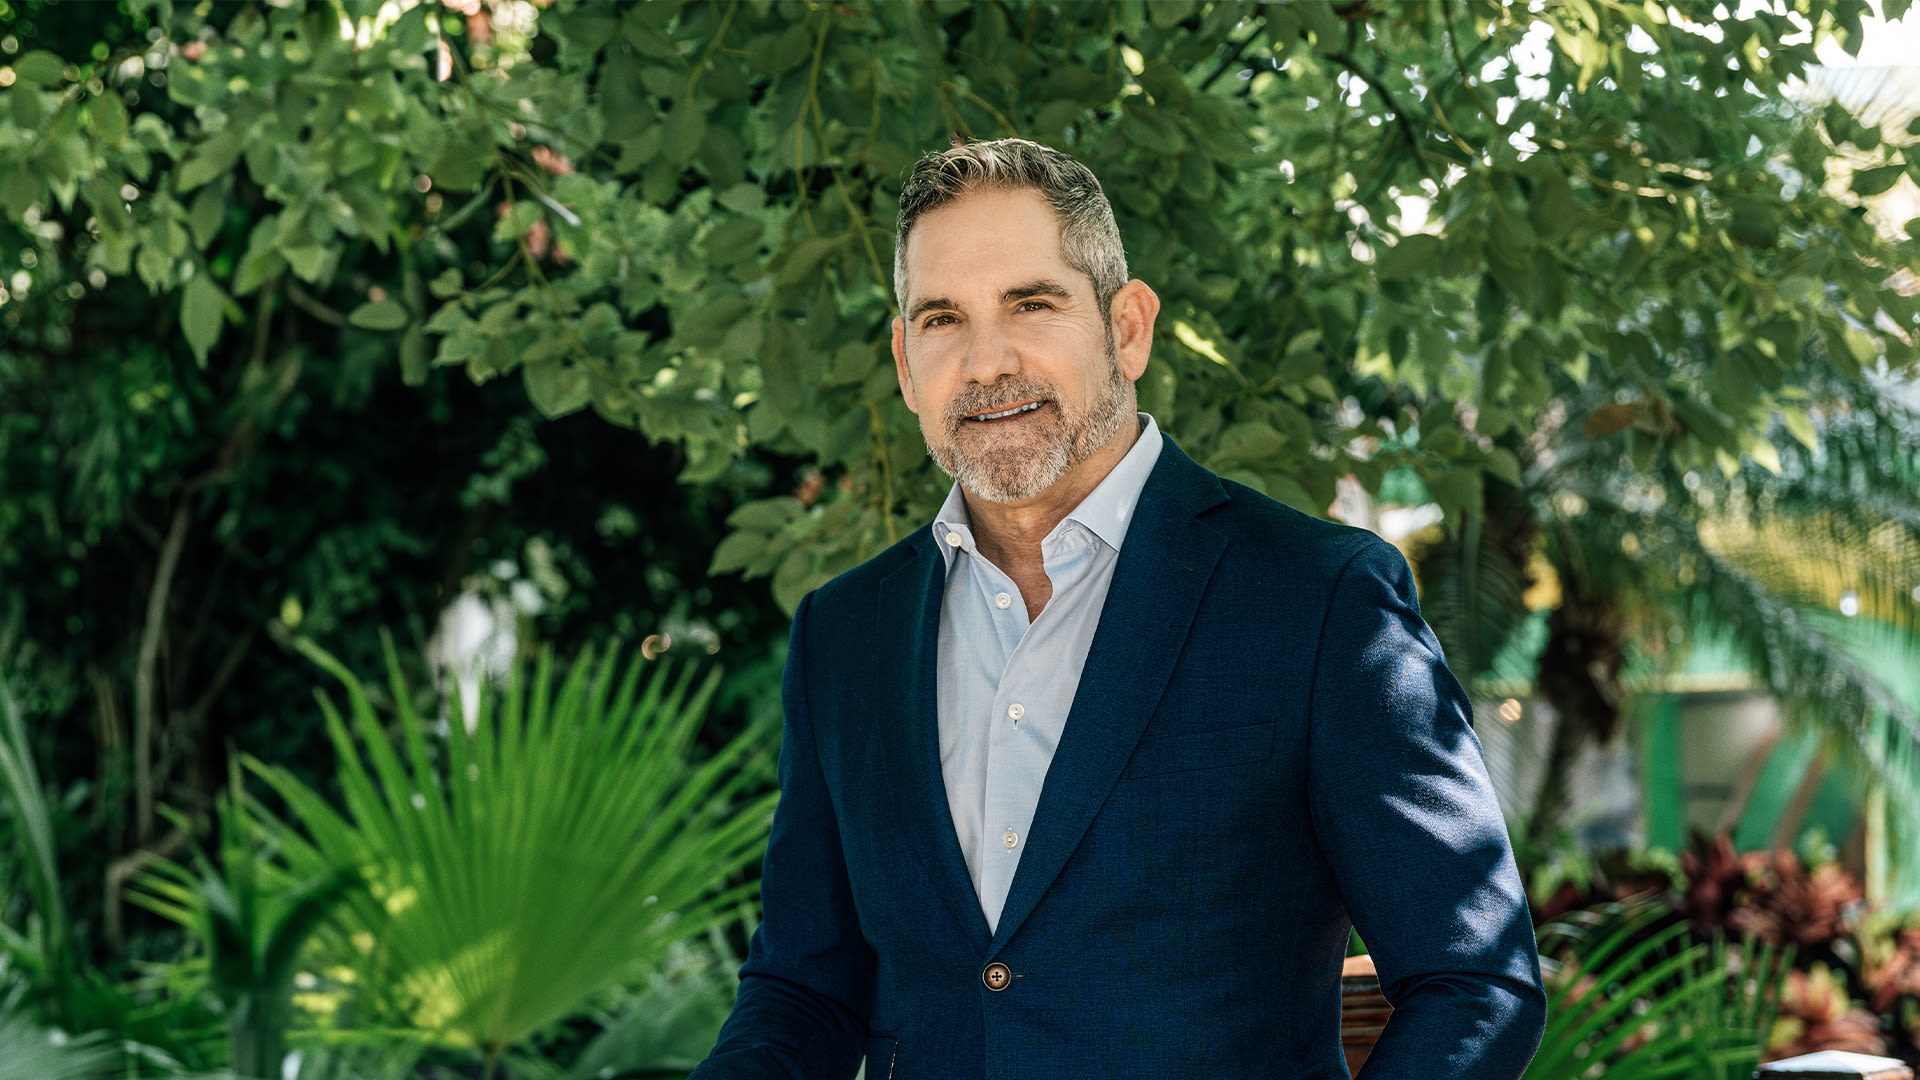 I’m a Self-Made Millionaire: I Followed These 7 Grant Cardone Tips To Get Rich